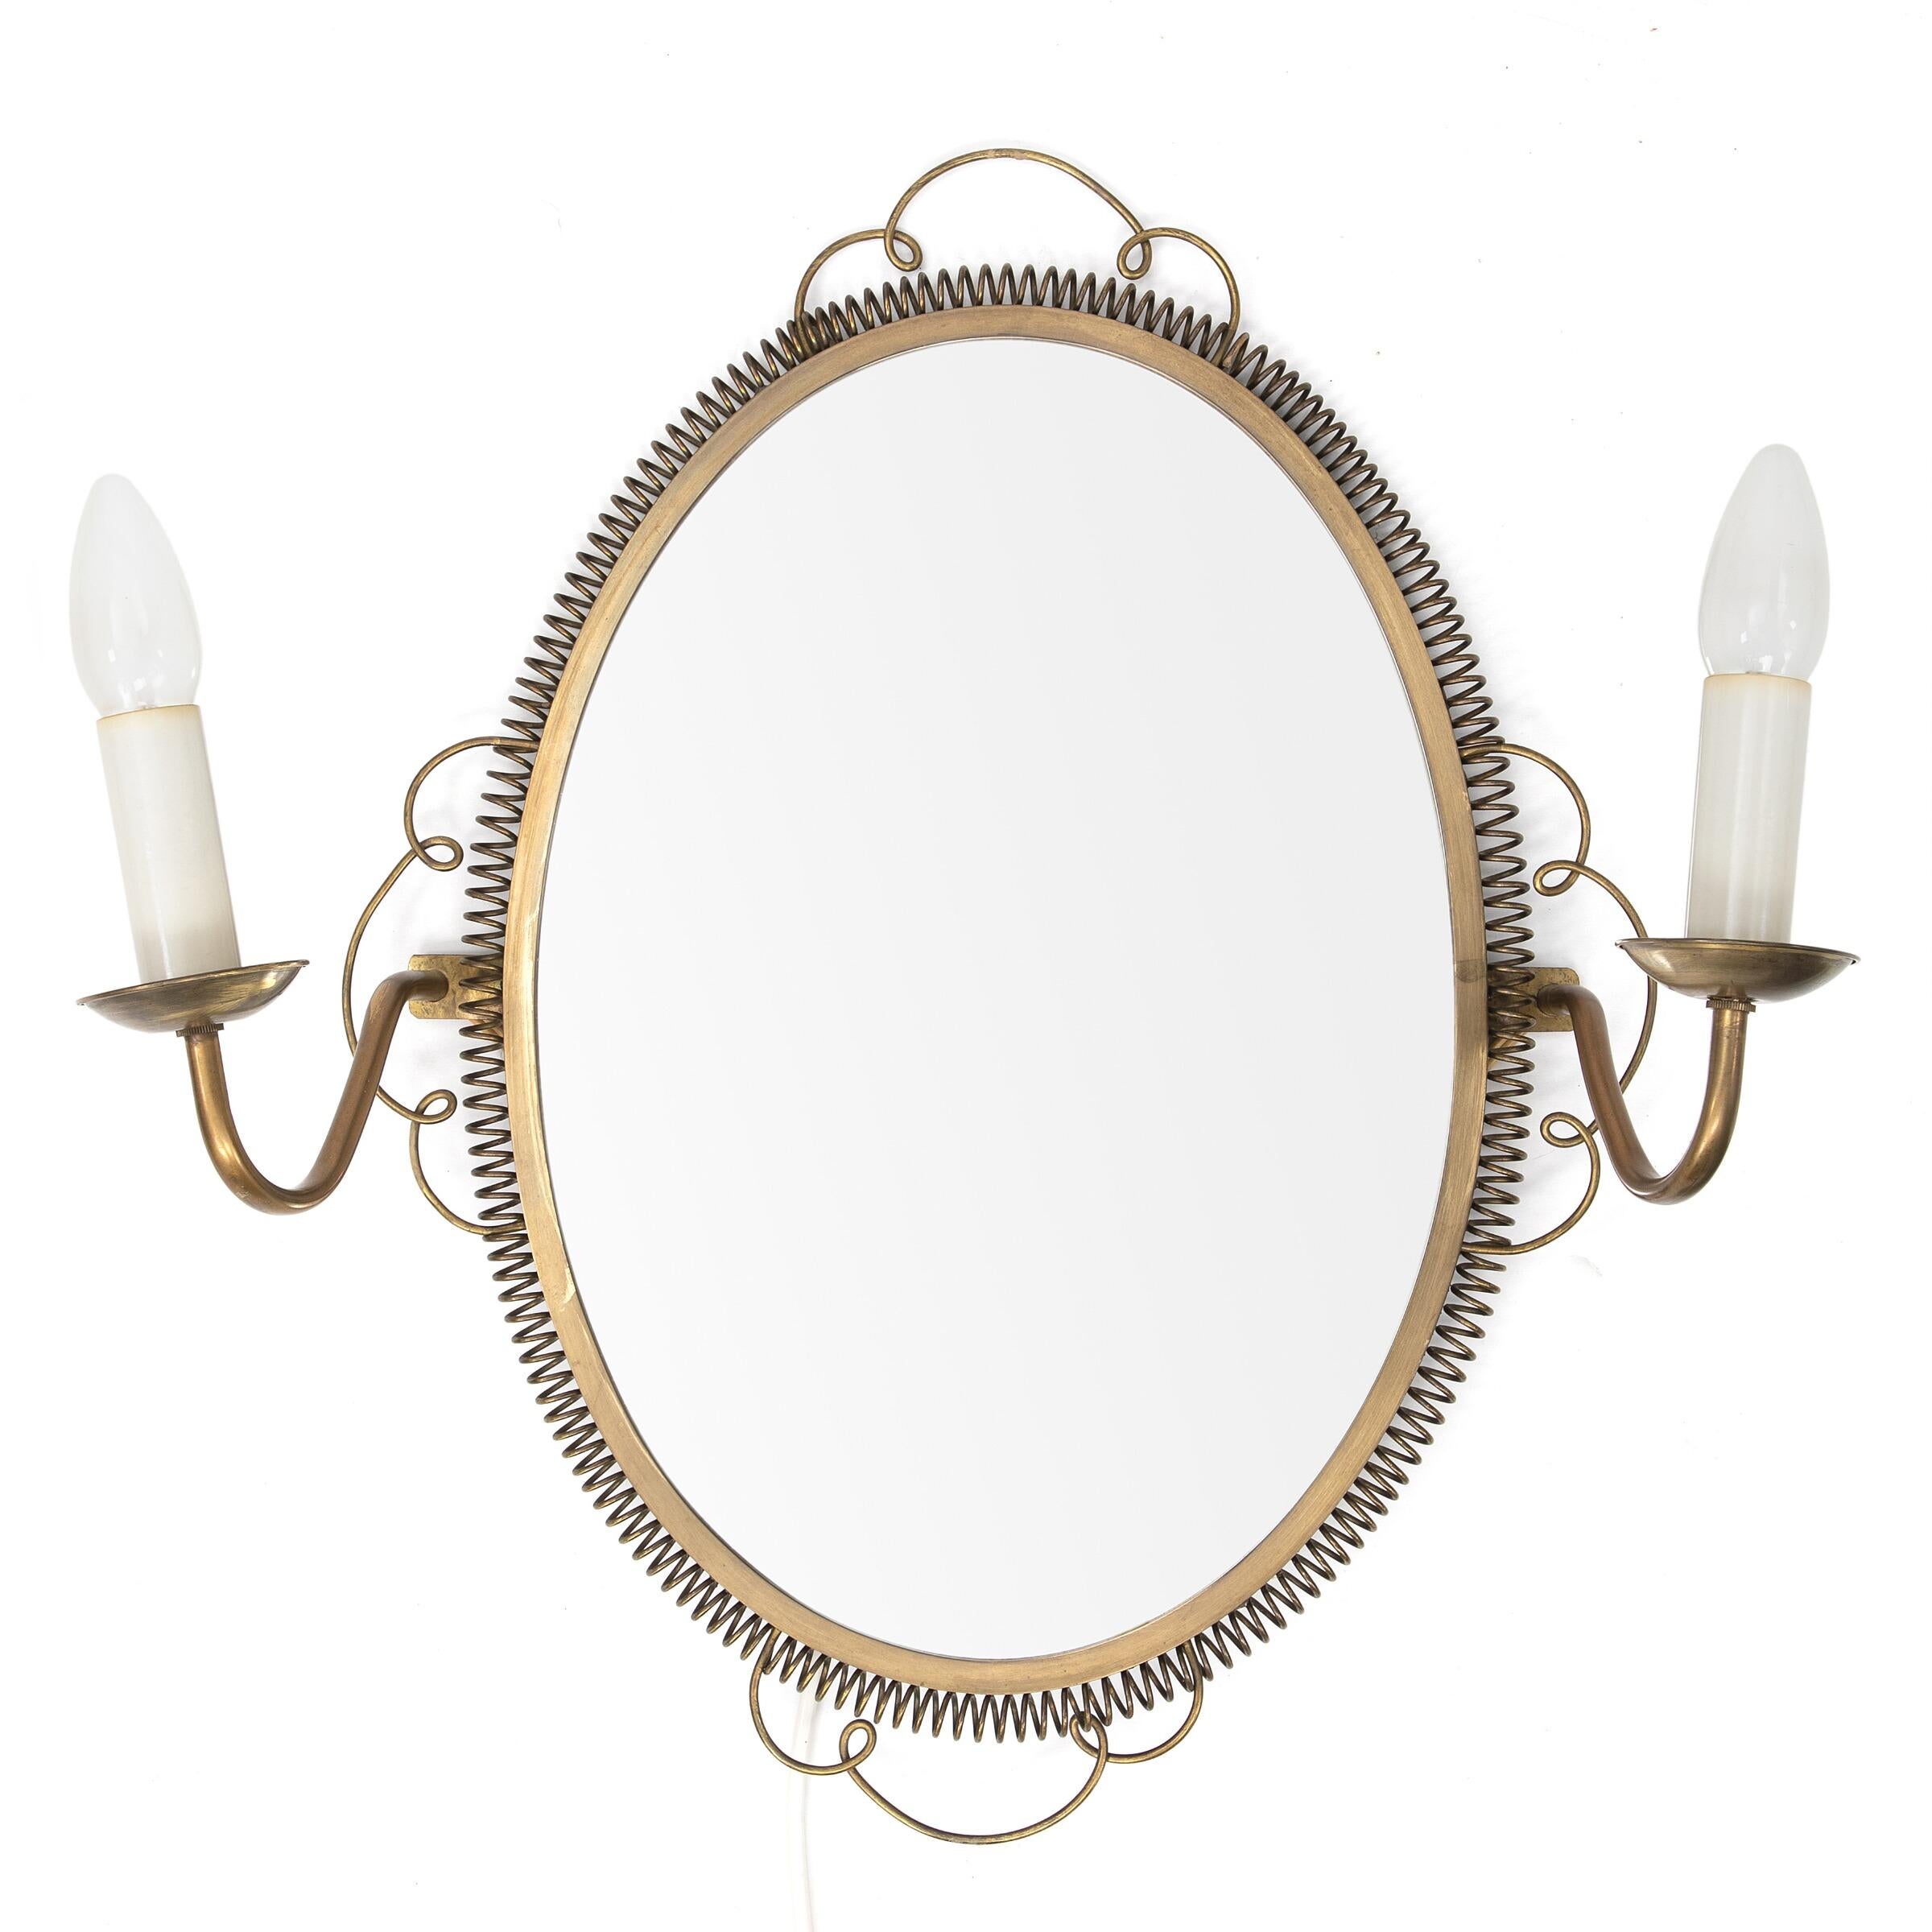 mirror with sconces attached